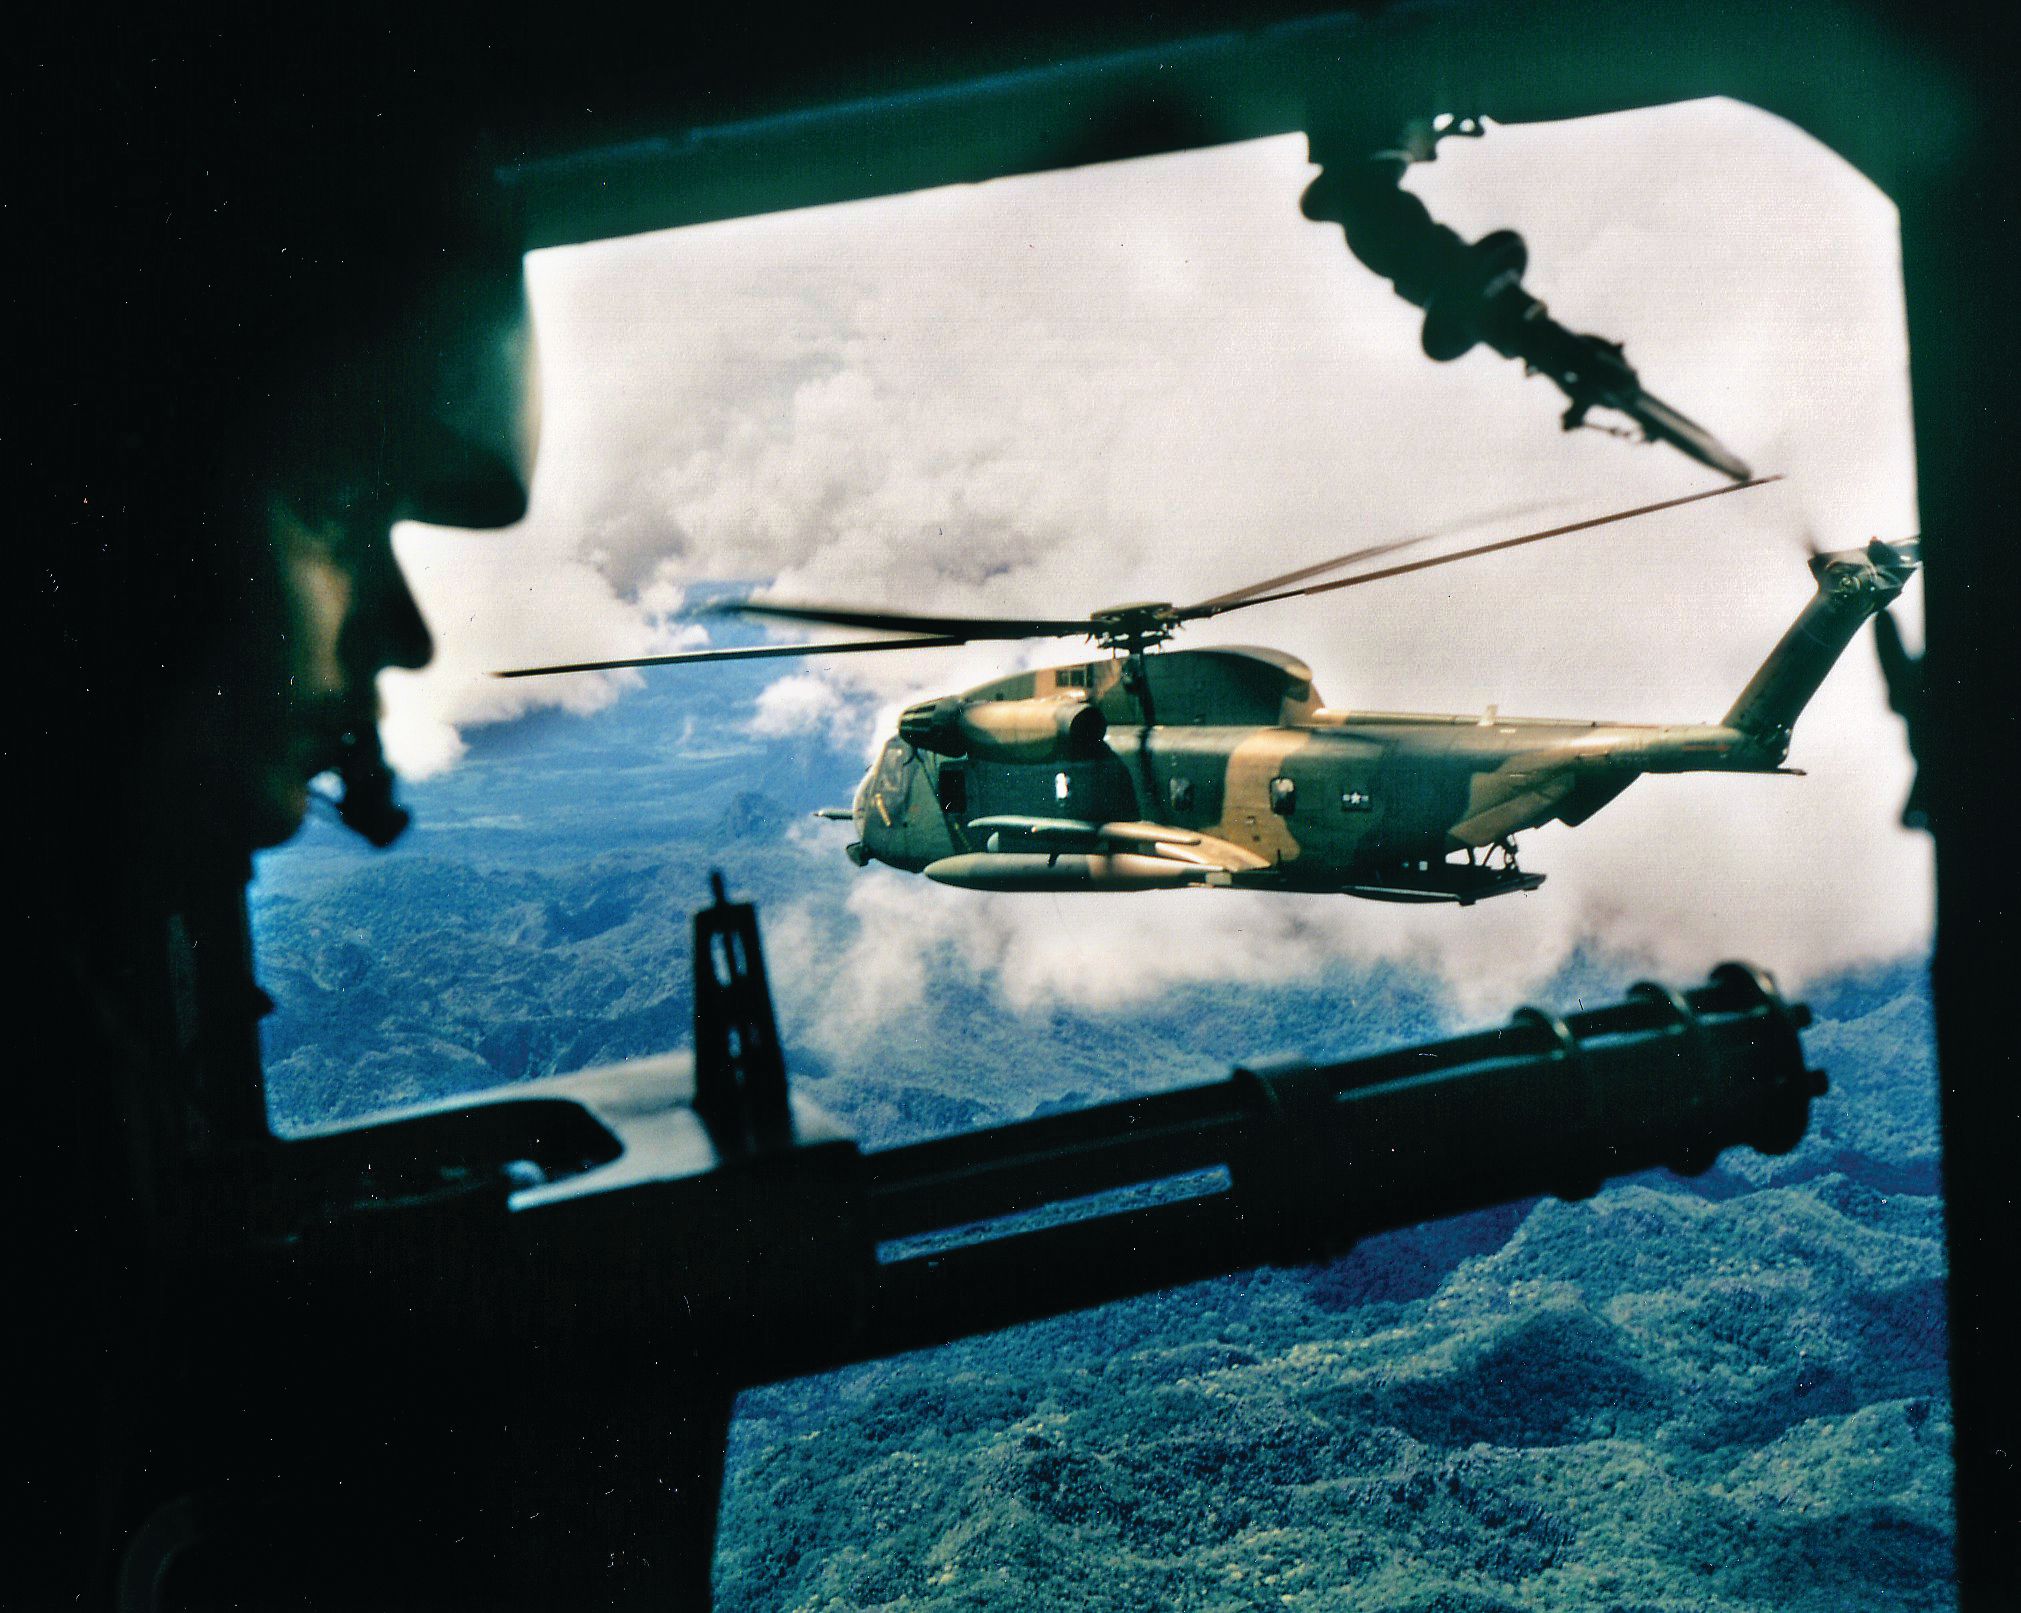 American helicopters in the skies over Vietnam in 1972. American air power helped blunt the NVA attacks and take the fight to North Vietnam.